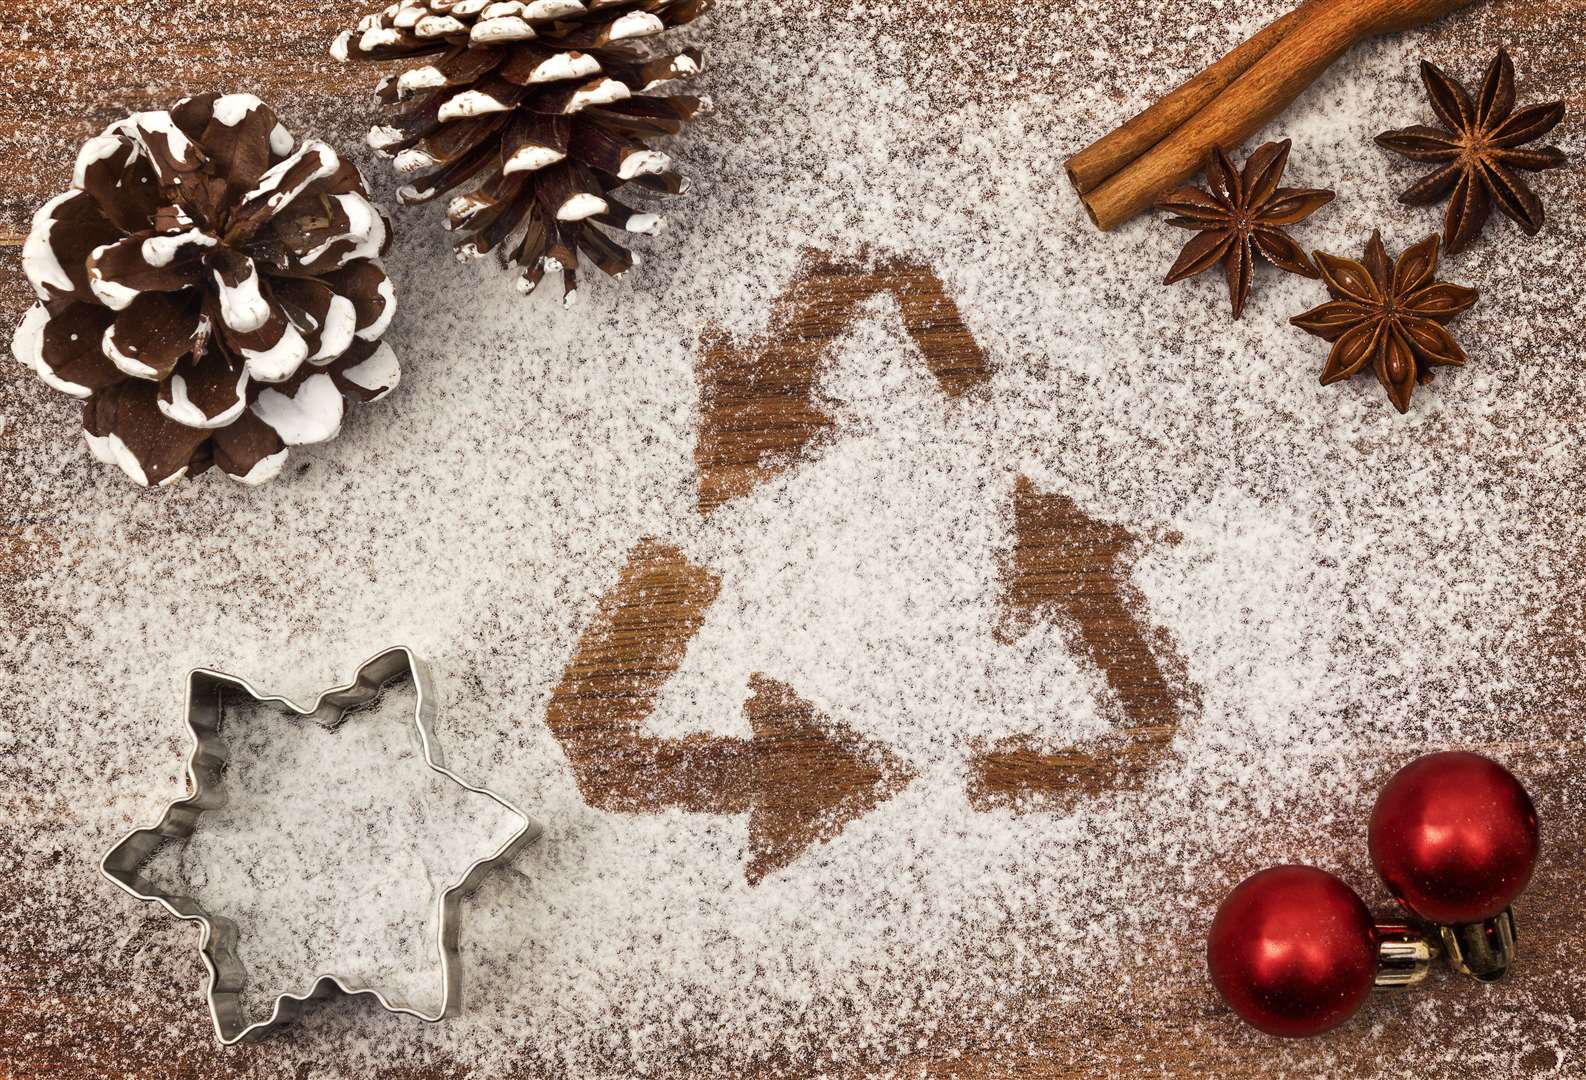 Re-use and recycle this Christmas with top tips from Zero Waste Scotland.